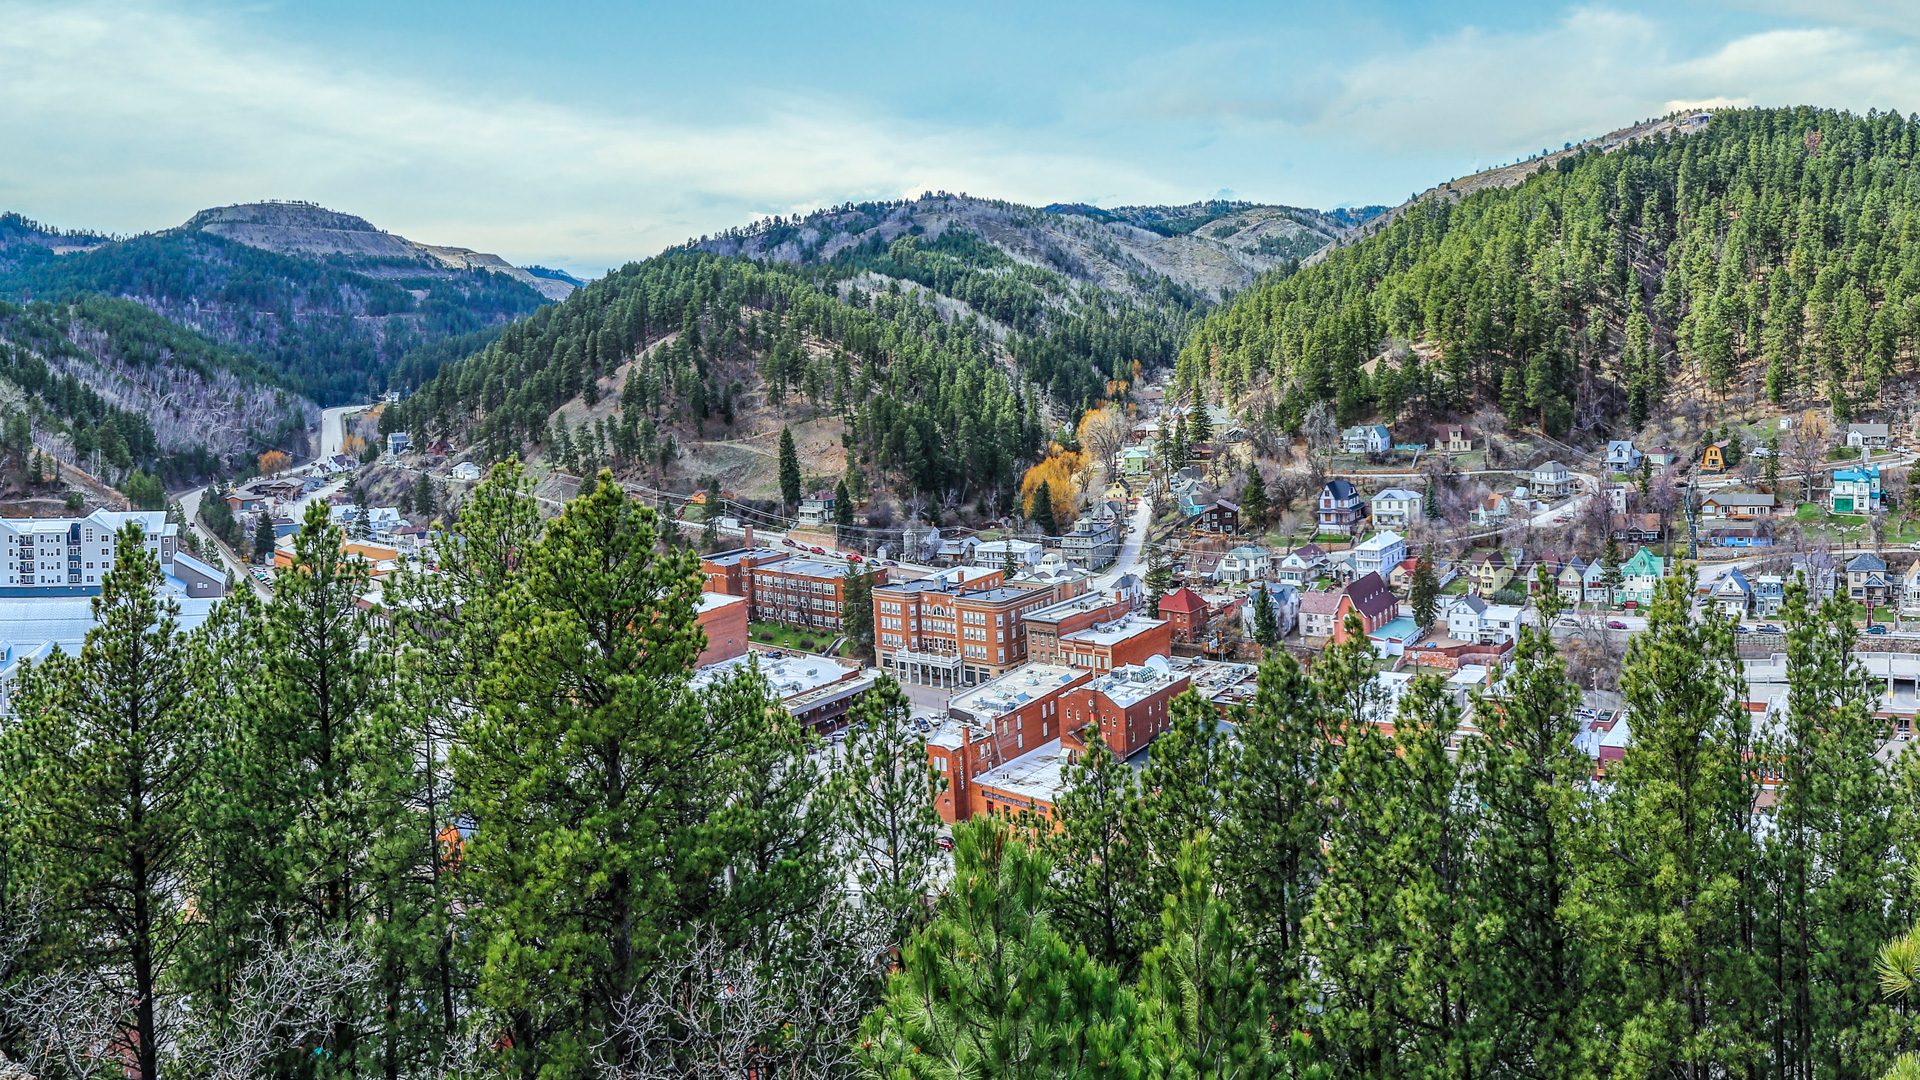 How to Spend a Long Weekend in the Black Hills